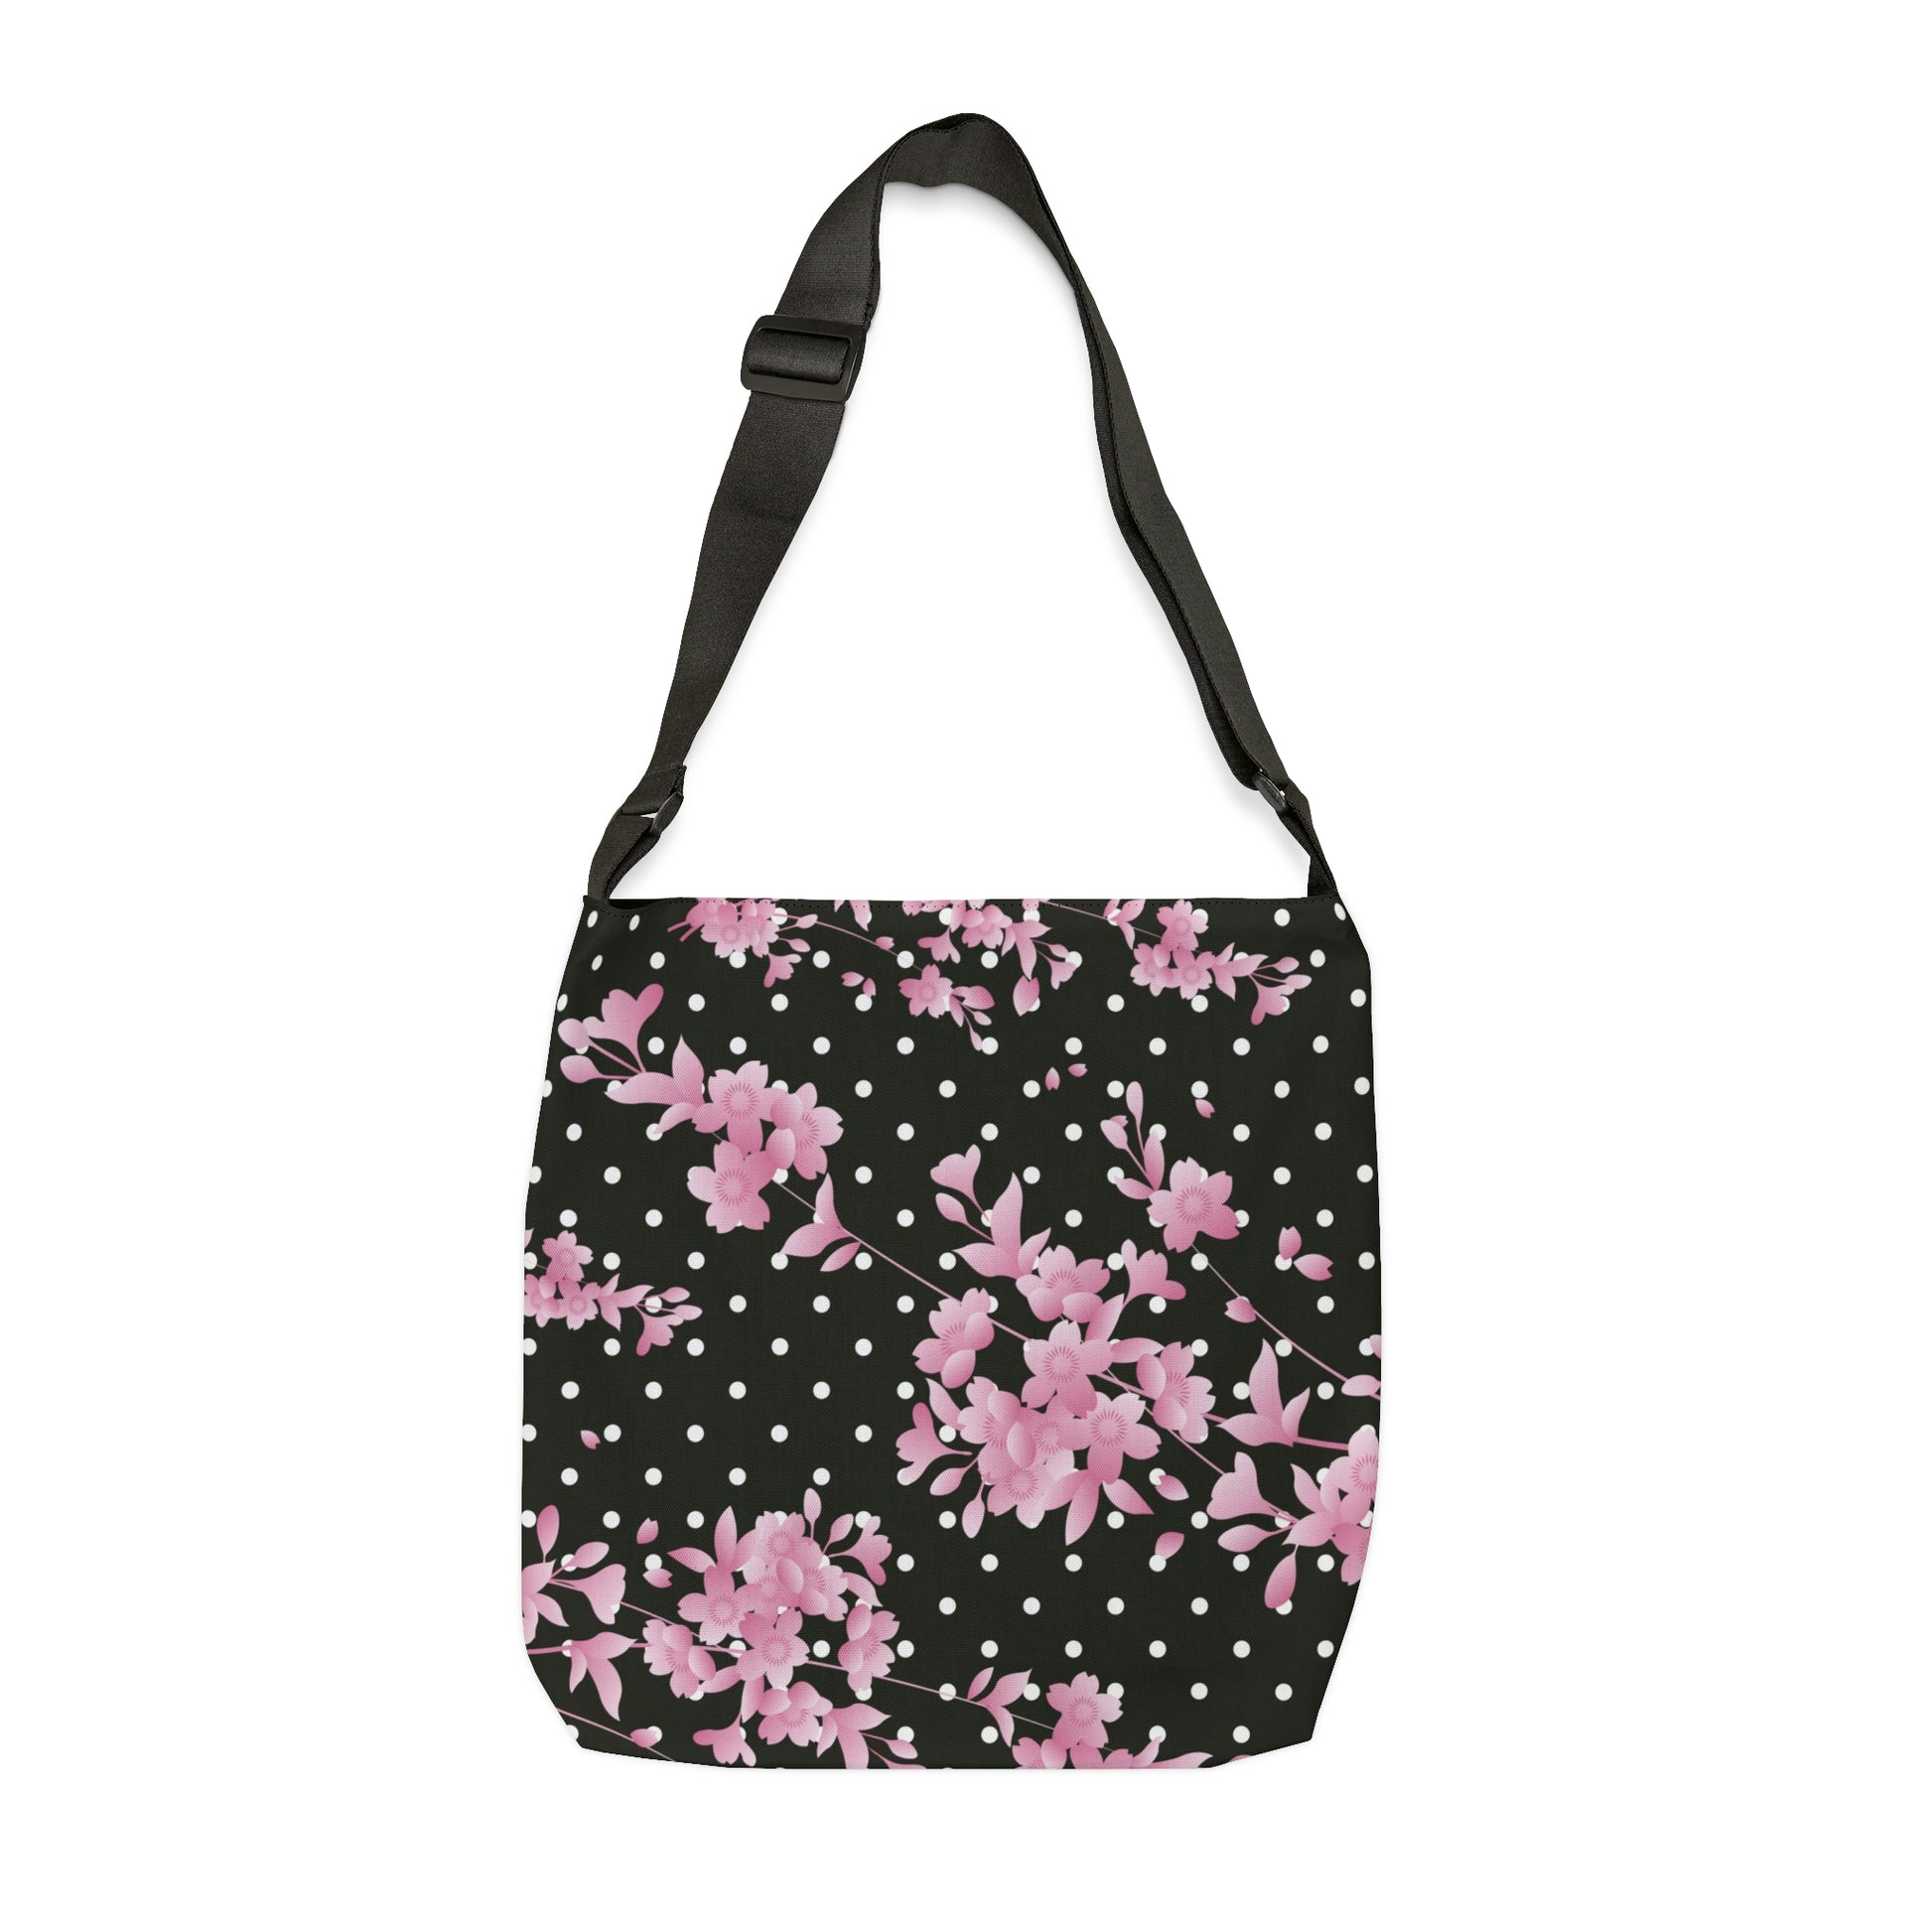 black women's crossbody tote bag with pink polkadots and pink flower print